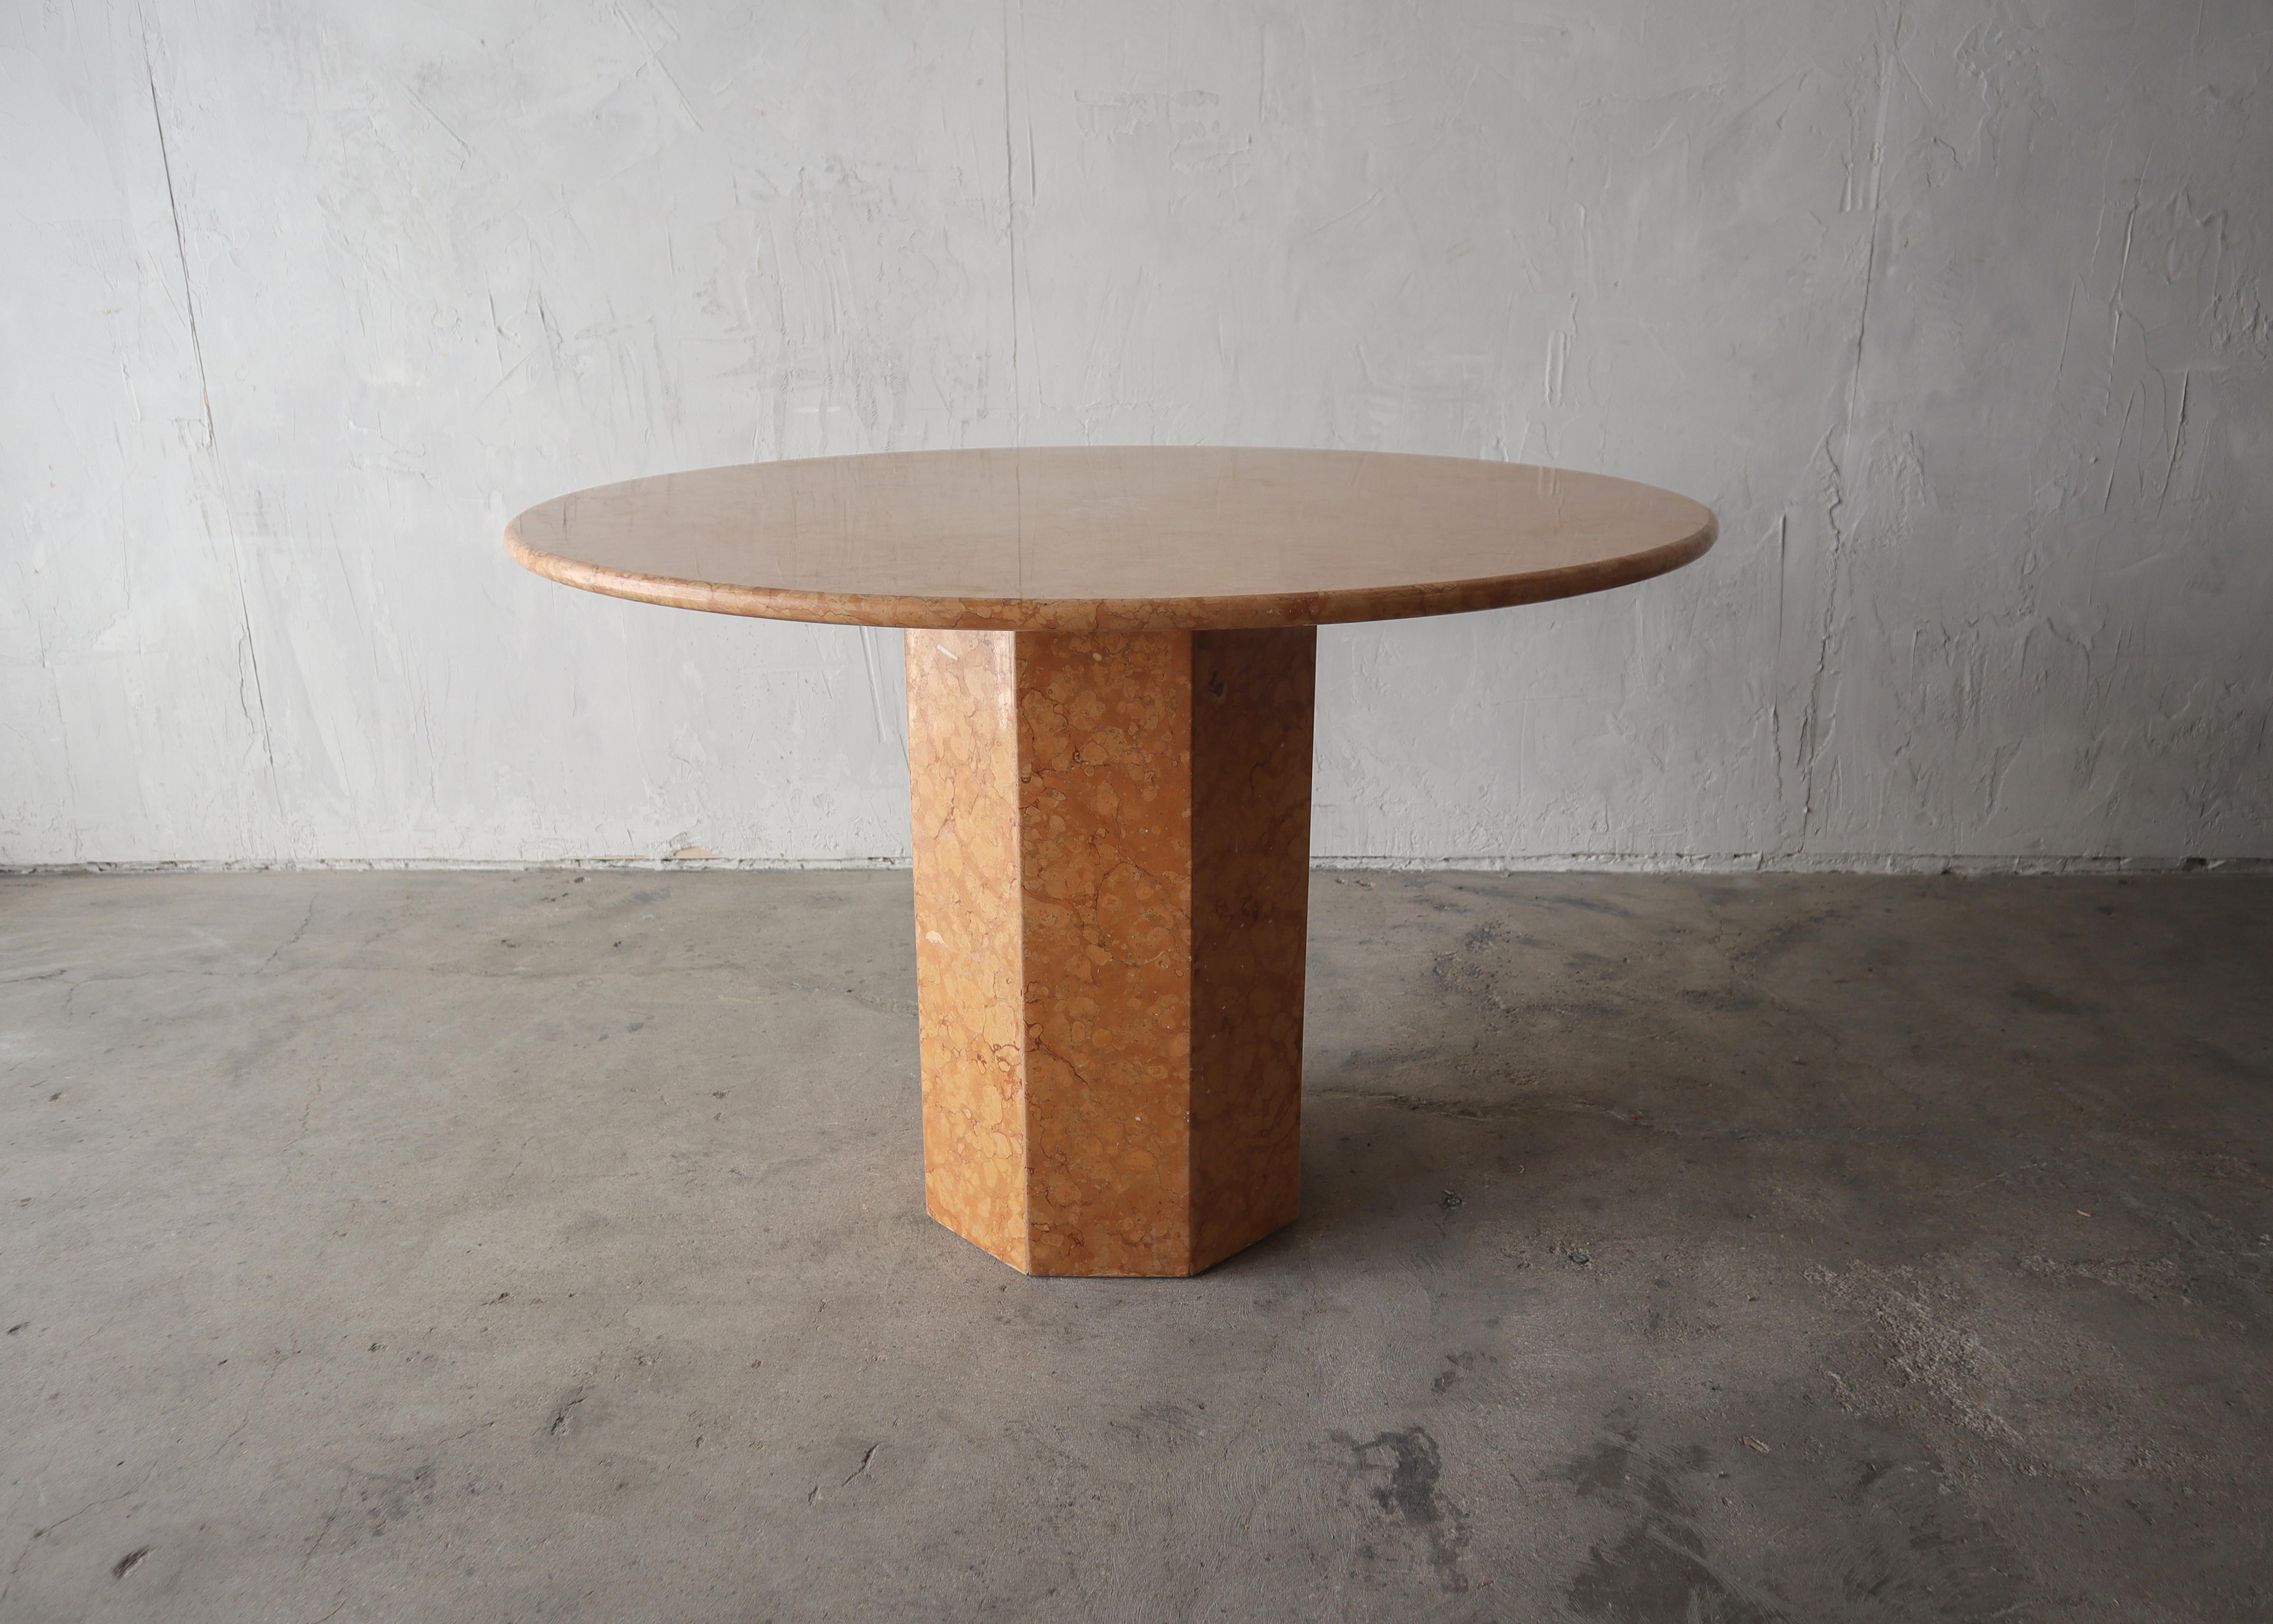 Absolutely stunning Post Modern, Rojo Alicante marble dining table.
This table is a great small space size, just large enough to seat 4 but small enough to not look awkward as a 2 seater either.  The marble is a unique terracotta color, that will